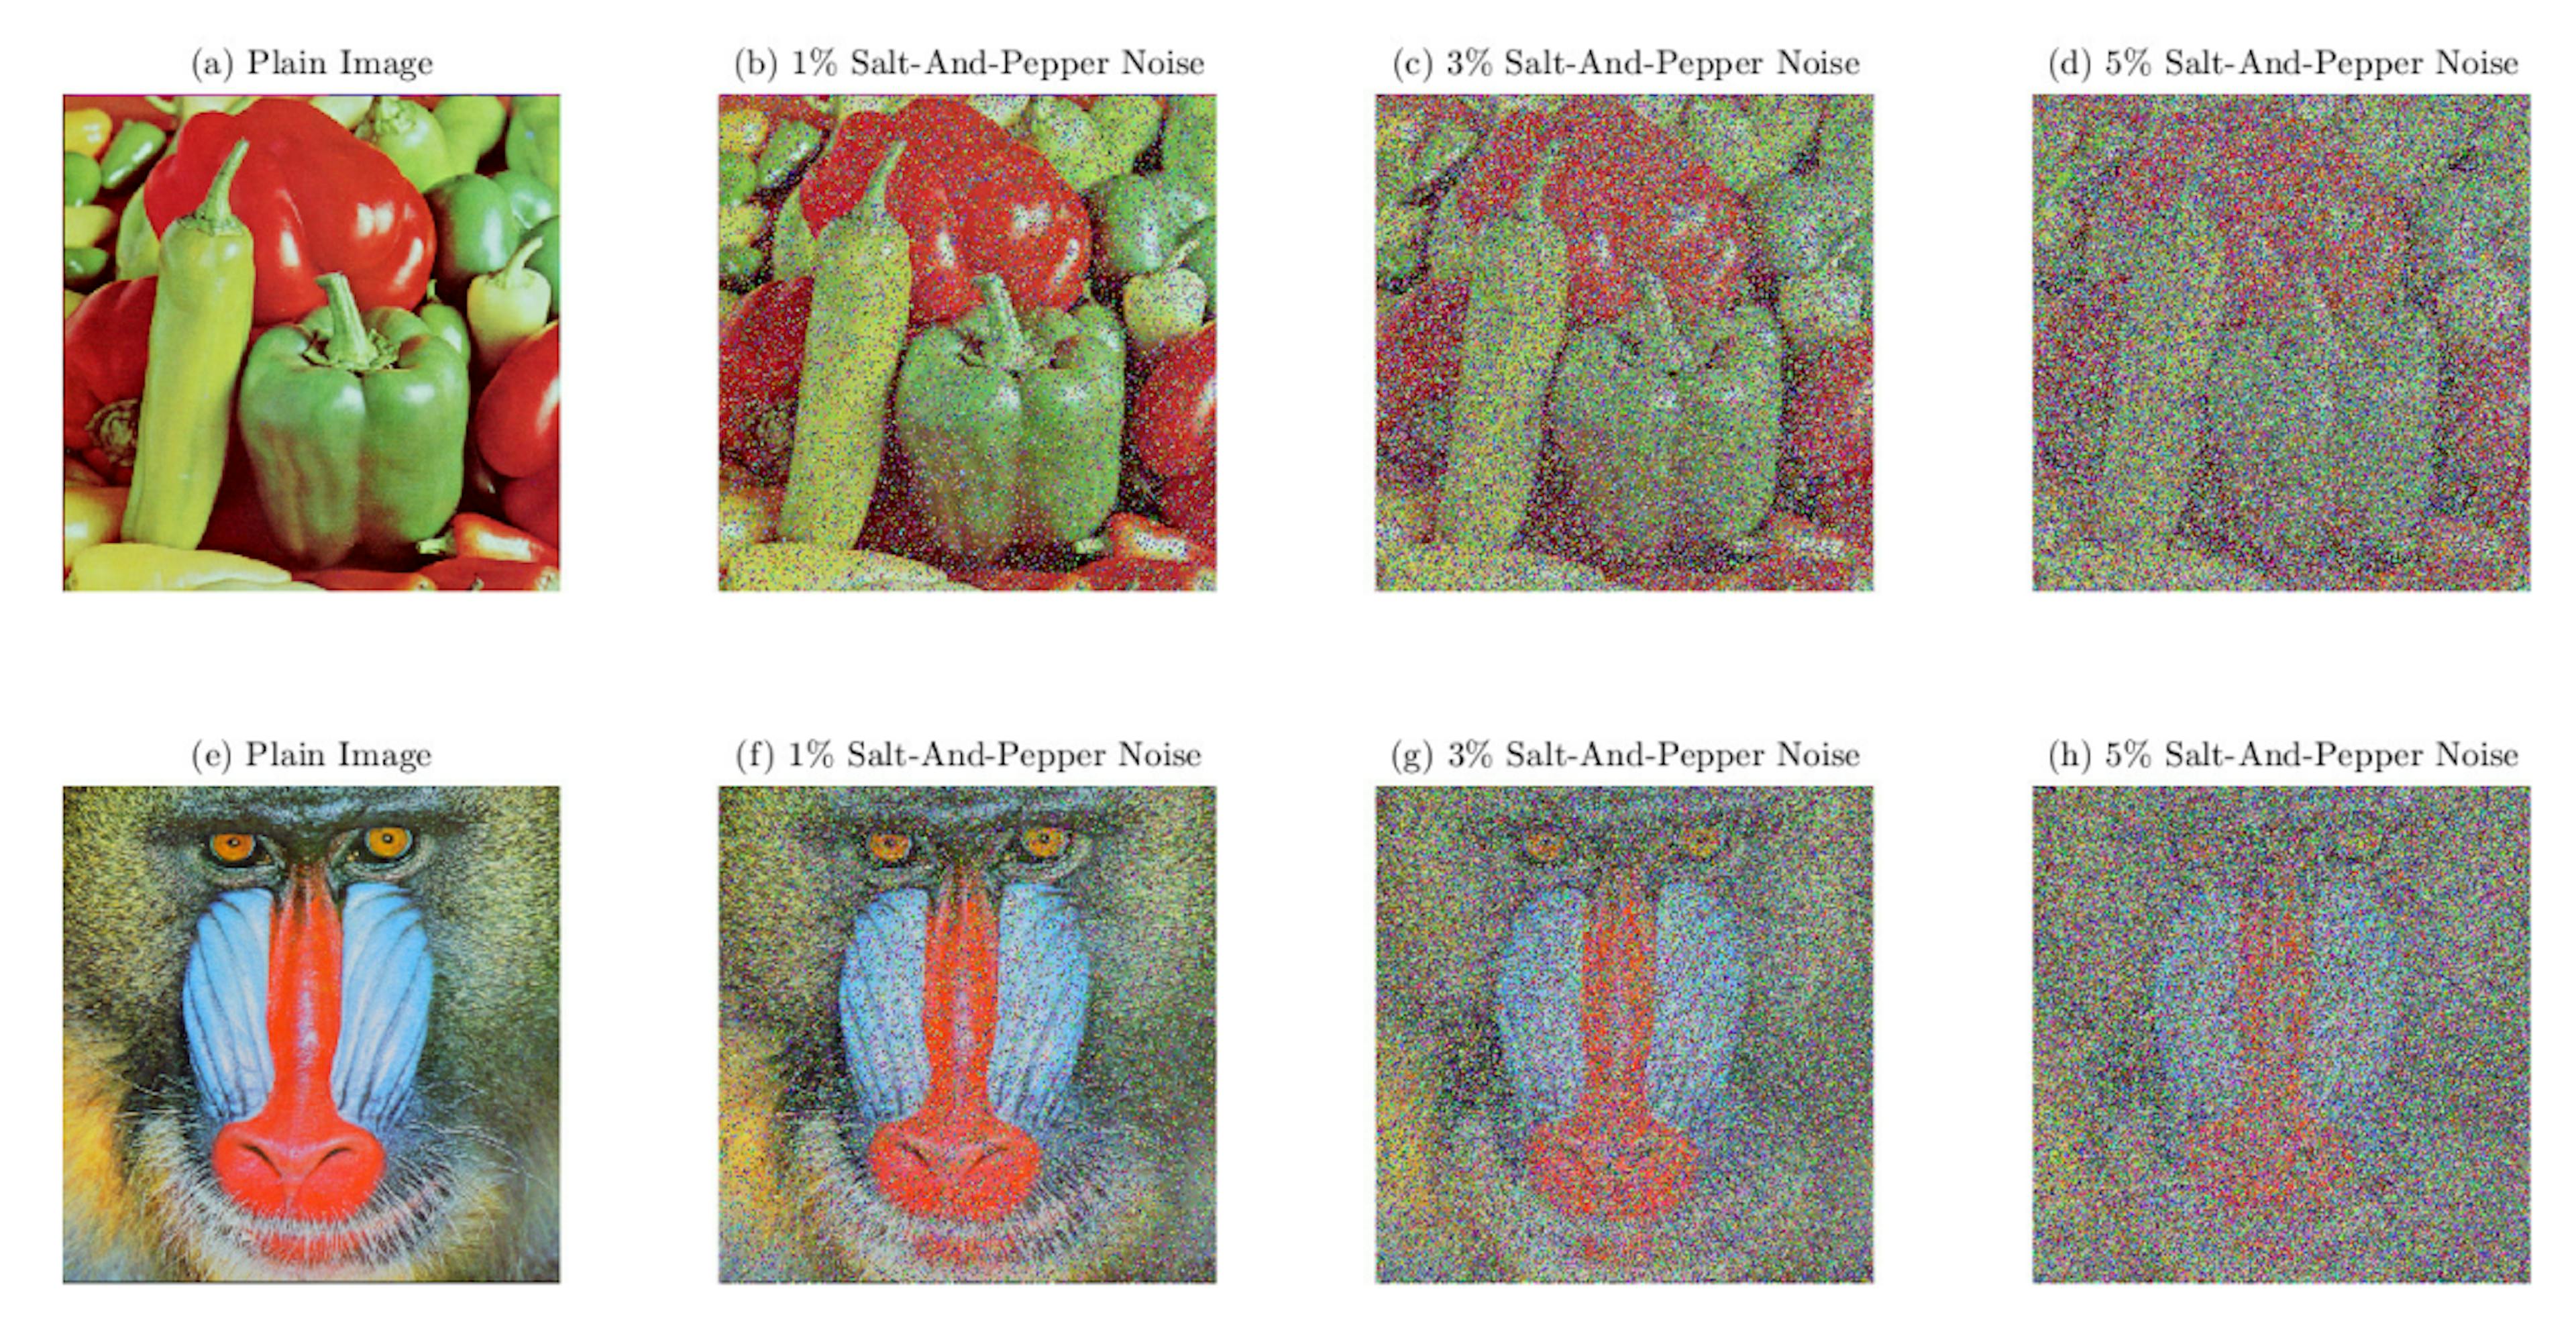 Figure 6: Resistance to noise. (a) plain image peppers, (b)-(d) decrypt the cipher image with 1%, 3%, 5% salt-and-pepper noise using PLCM, (e) plain image mandrill, (f)-(h) decrypt the cipher image with 1%, 3%, 5% salt-and-pepper noise using 2DLASM,.